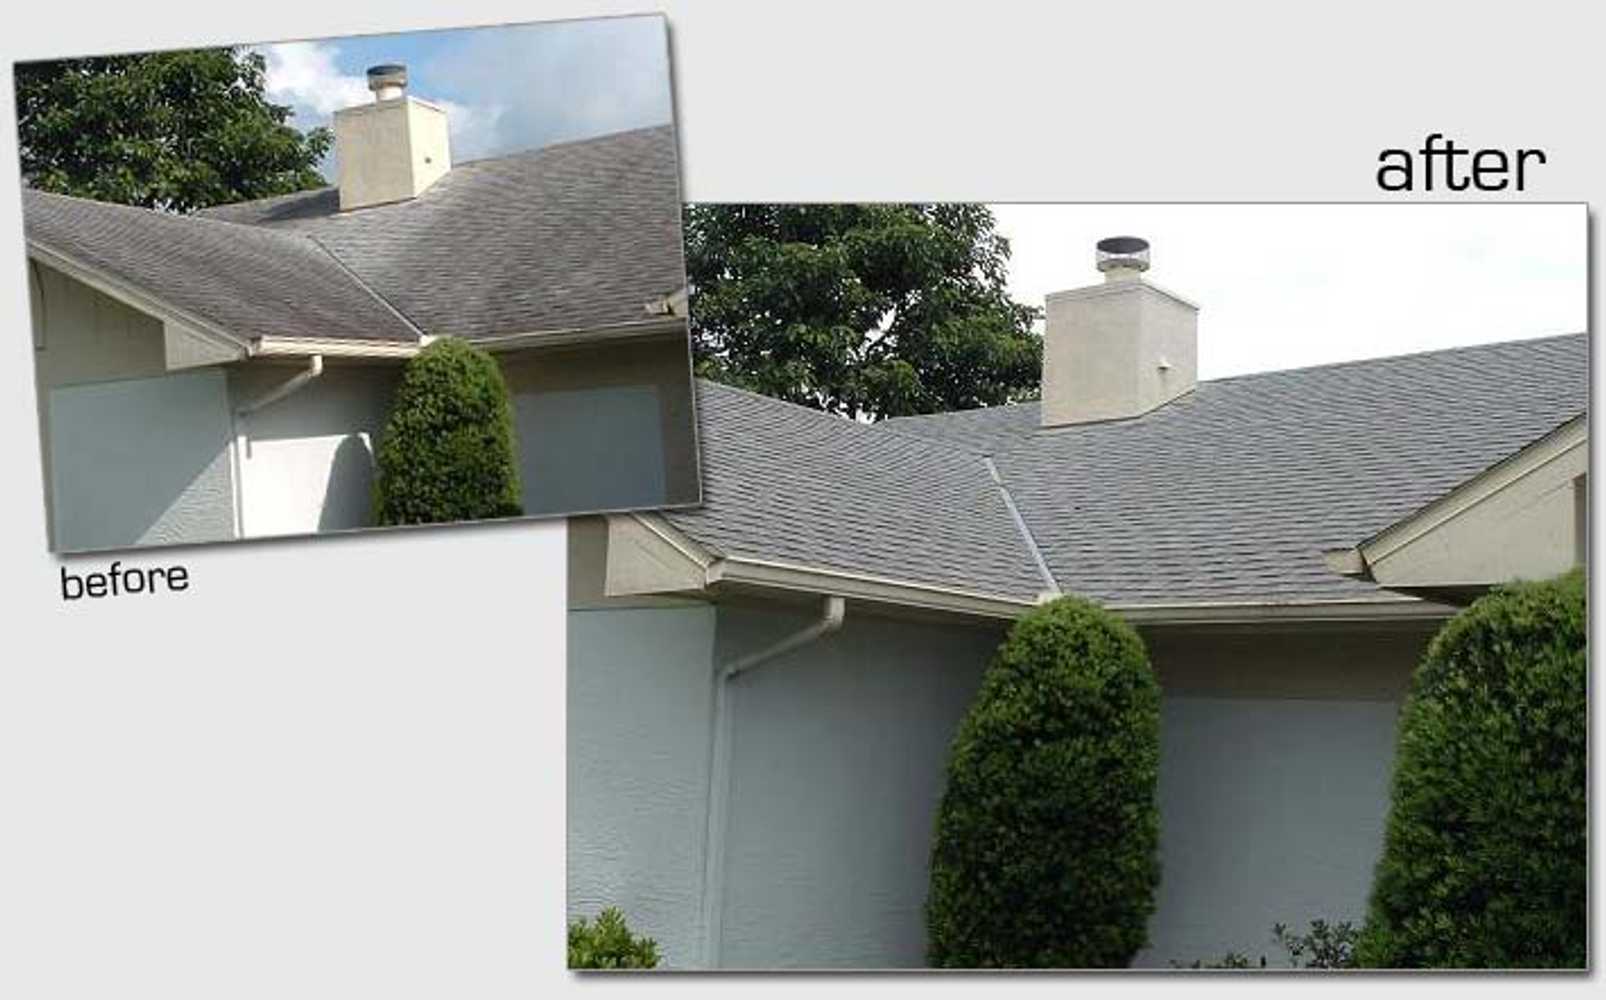 House Painting Services | Roof Cleaning Services | Pressure Washing Services Berks County PA